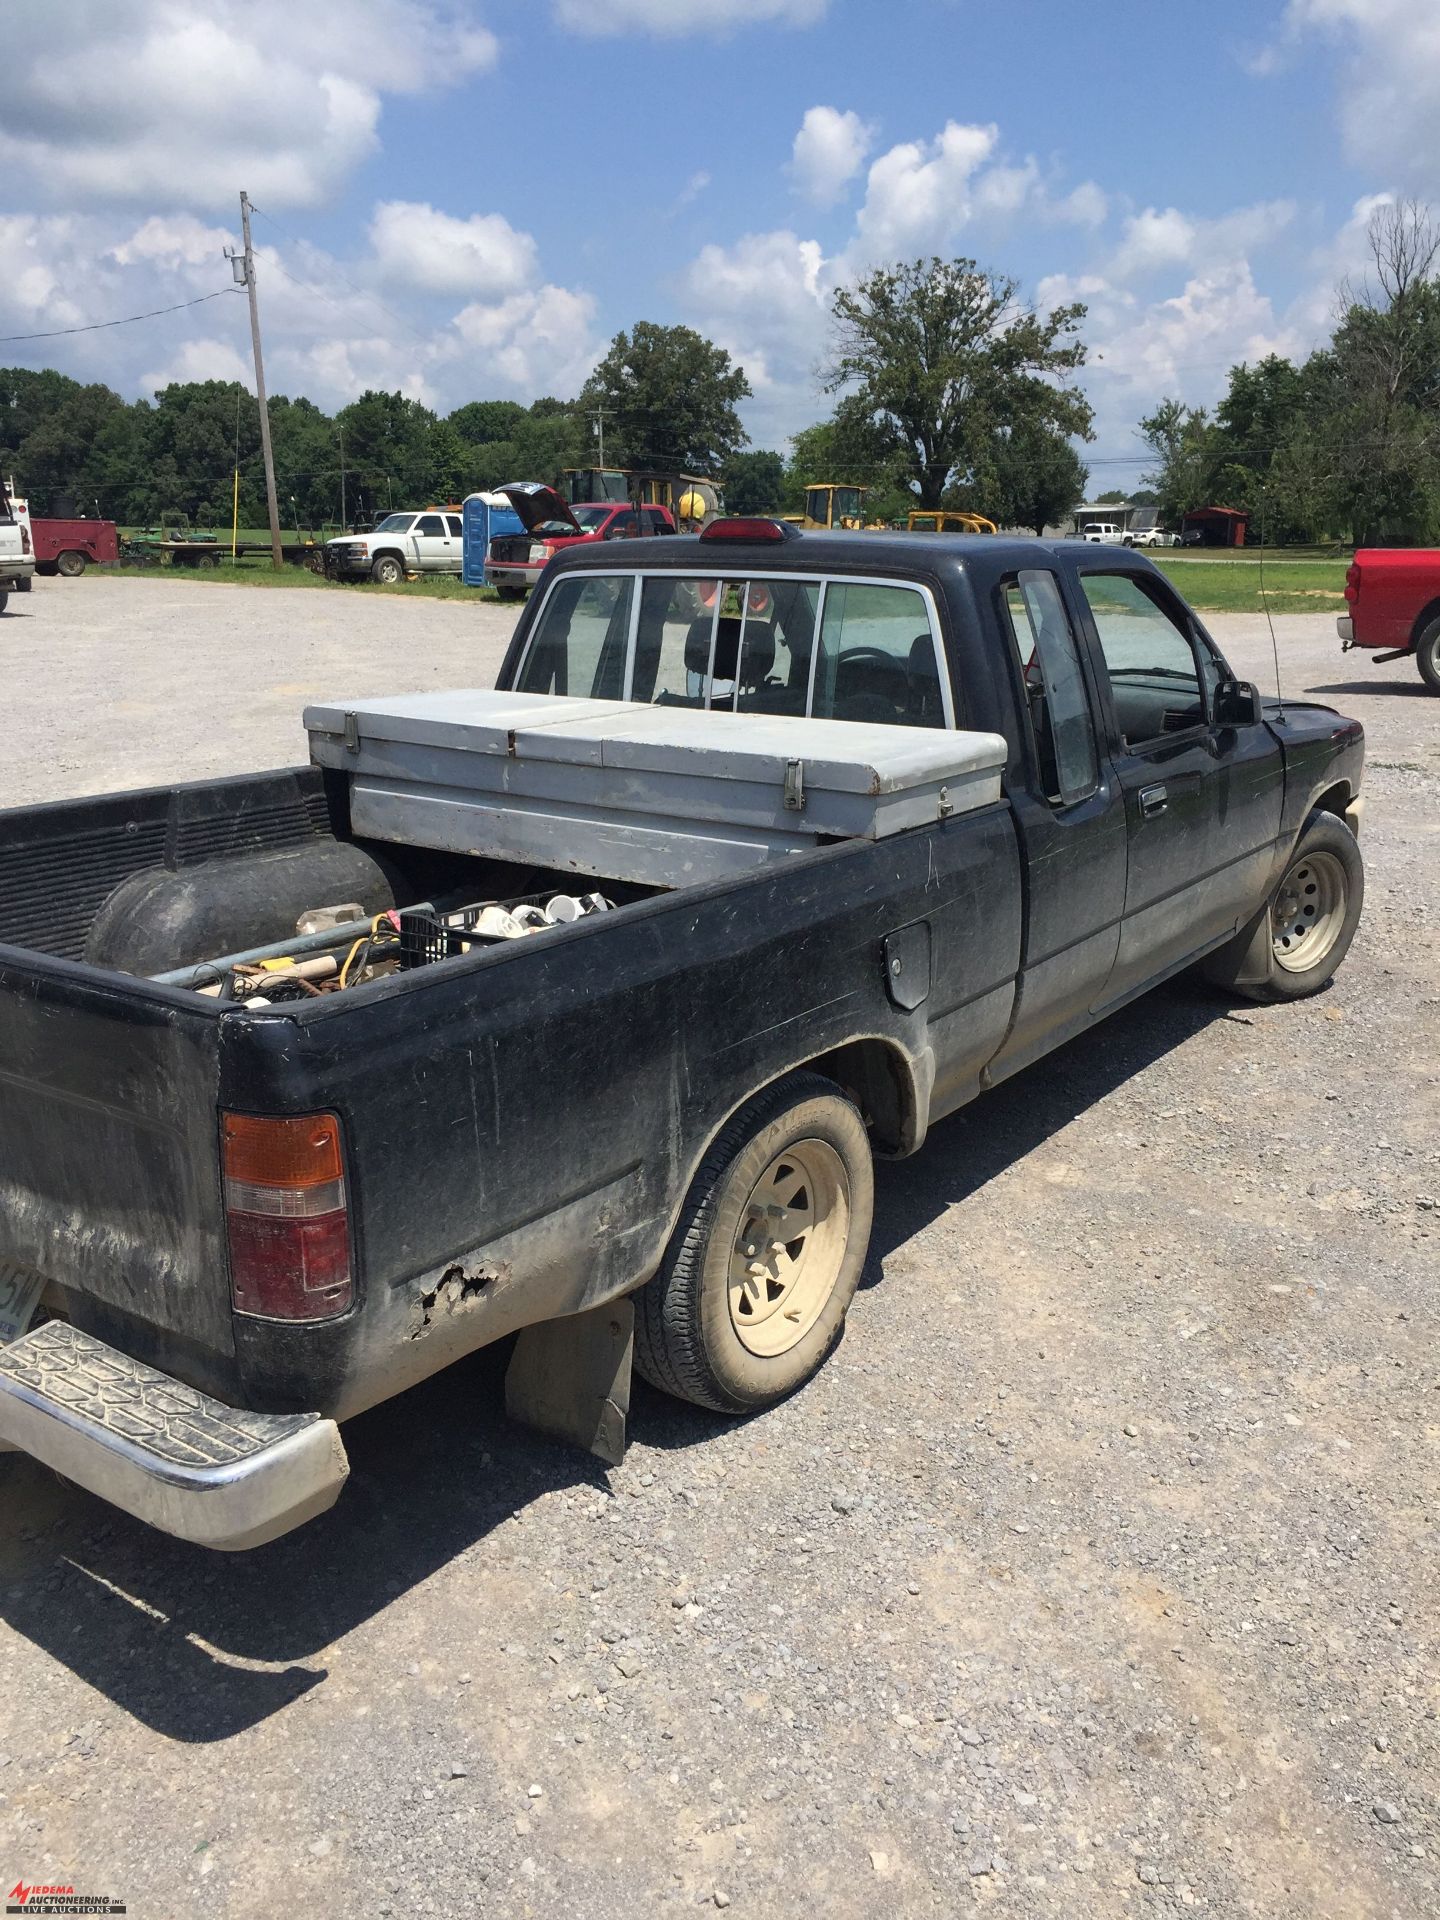 1994 TOYOTA EXTENDED CAB PICKUP TRUCK, LONG BOX, 4-CYLINDER GAS ENGINE, AUTOMATIC TRANS, ASSORTED - Image 3 of 6